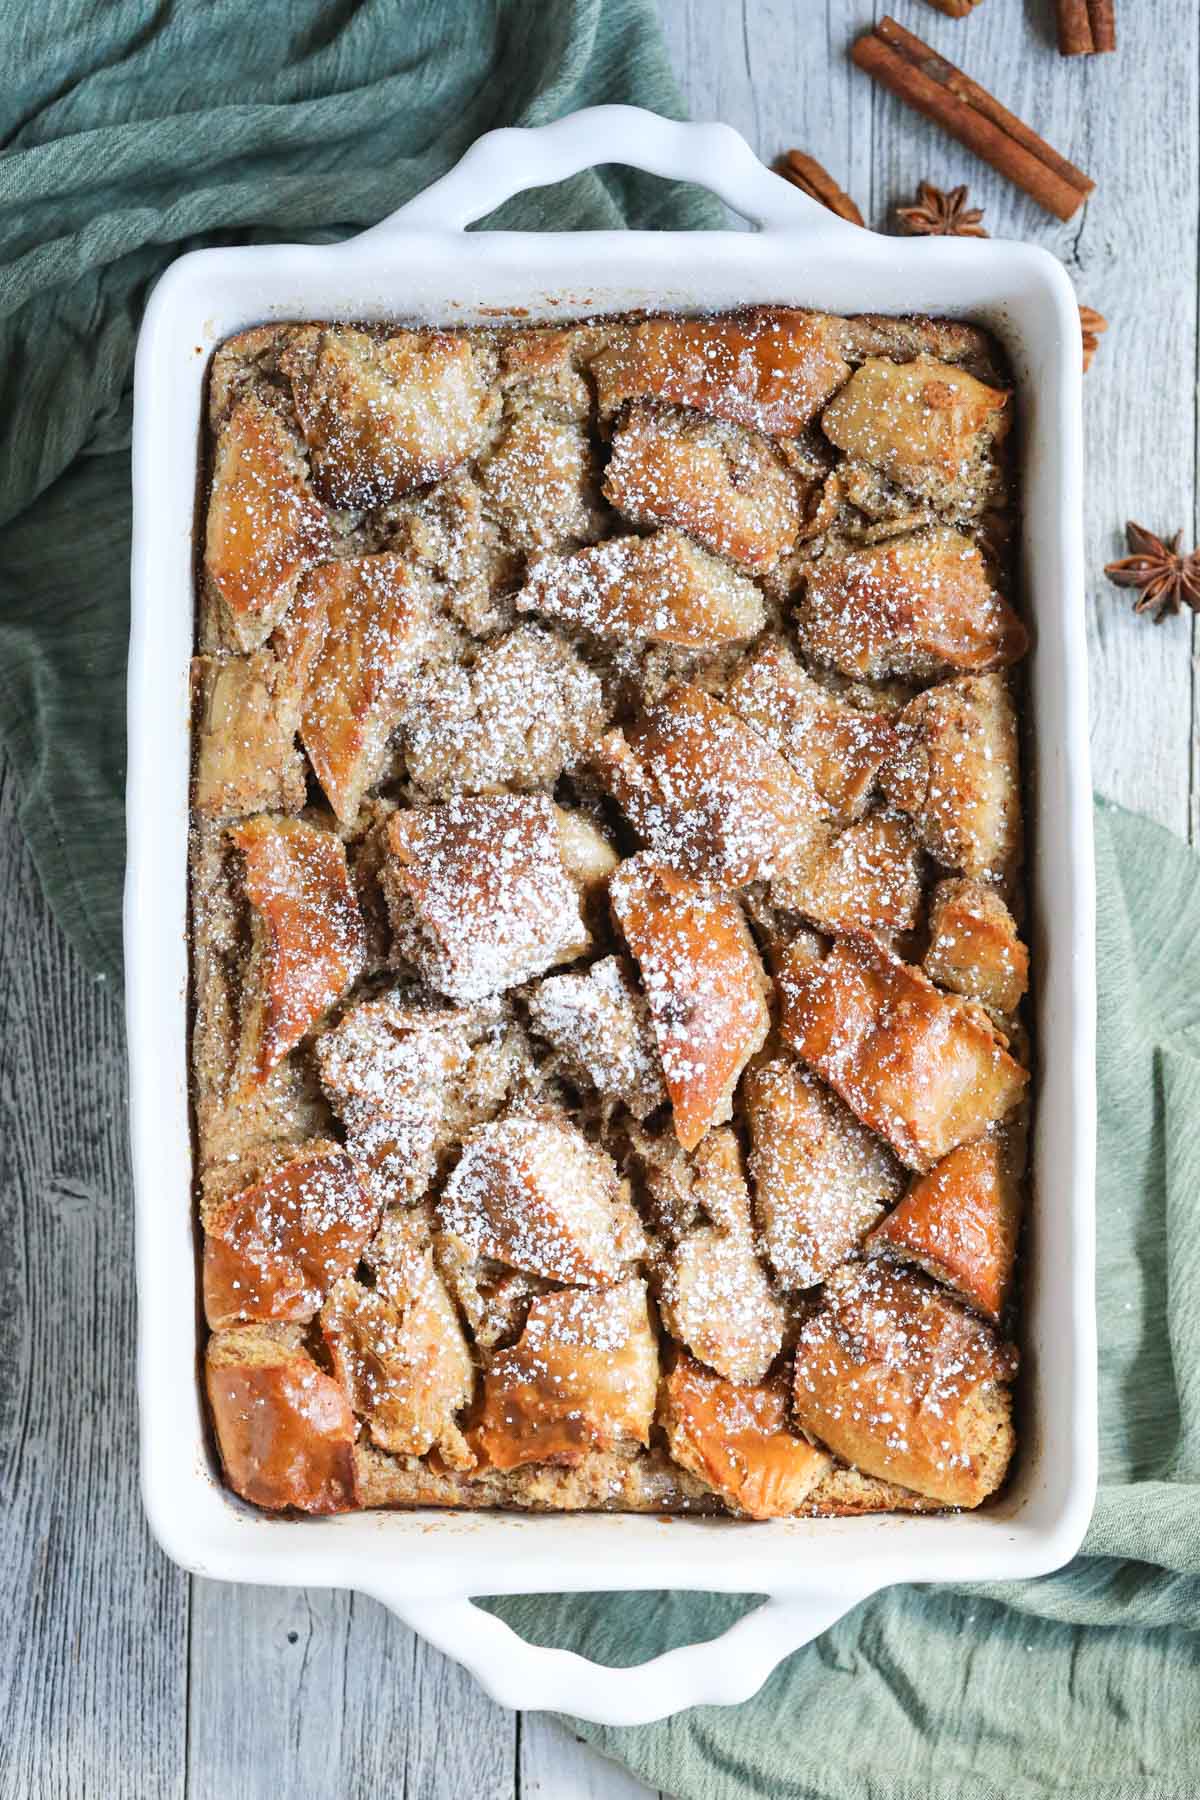 bread pudding in a white baking dish with a green linen underneath.